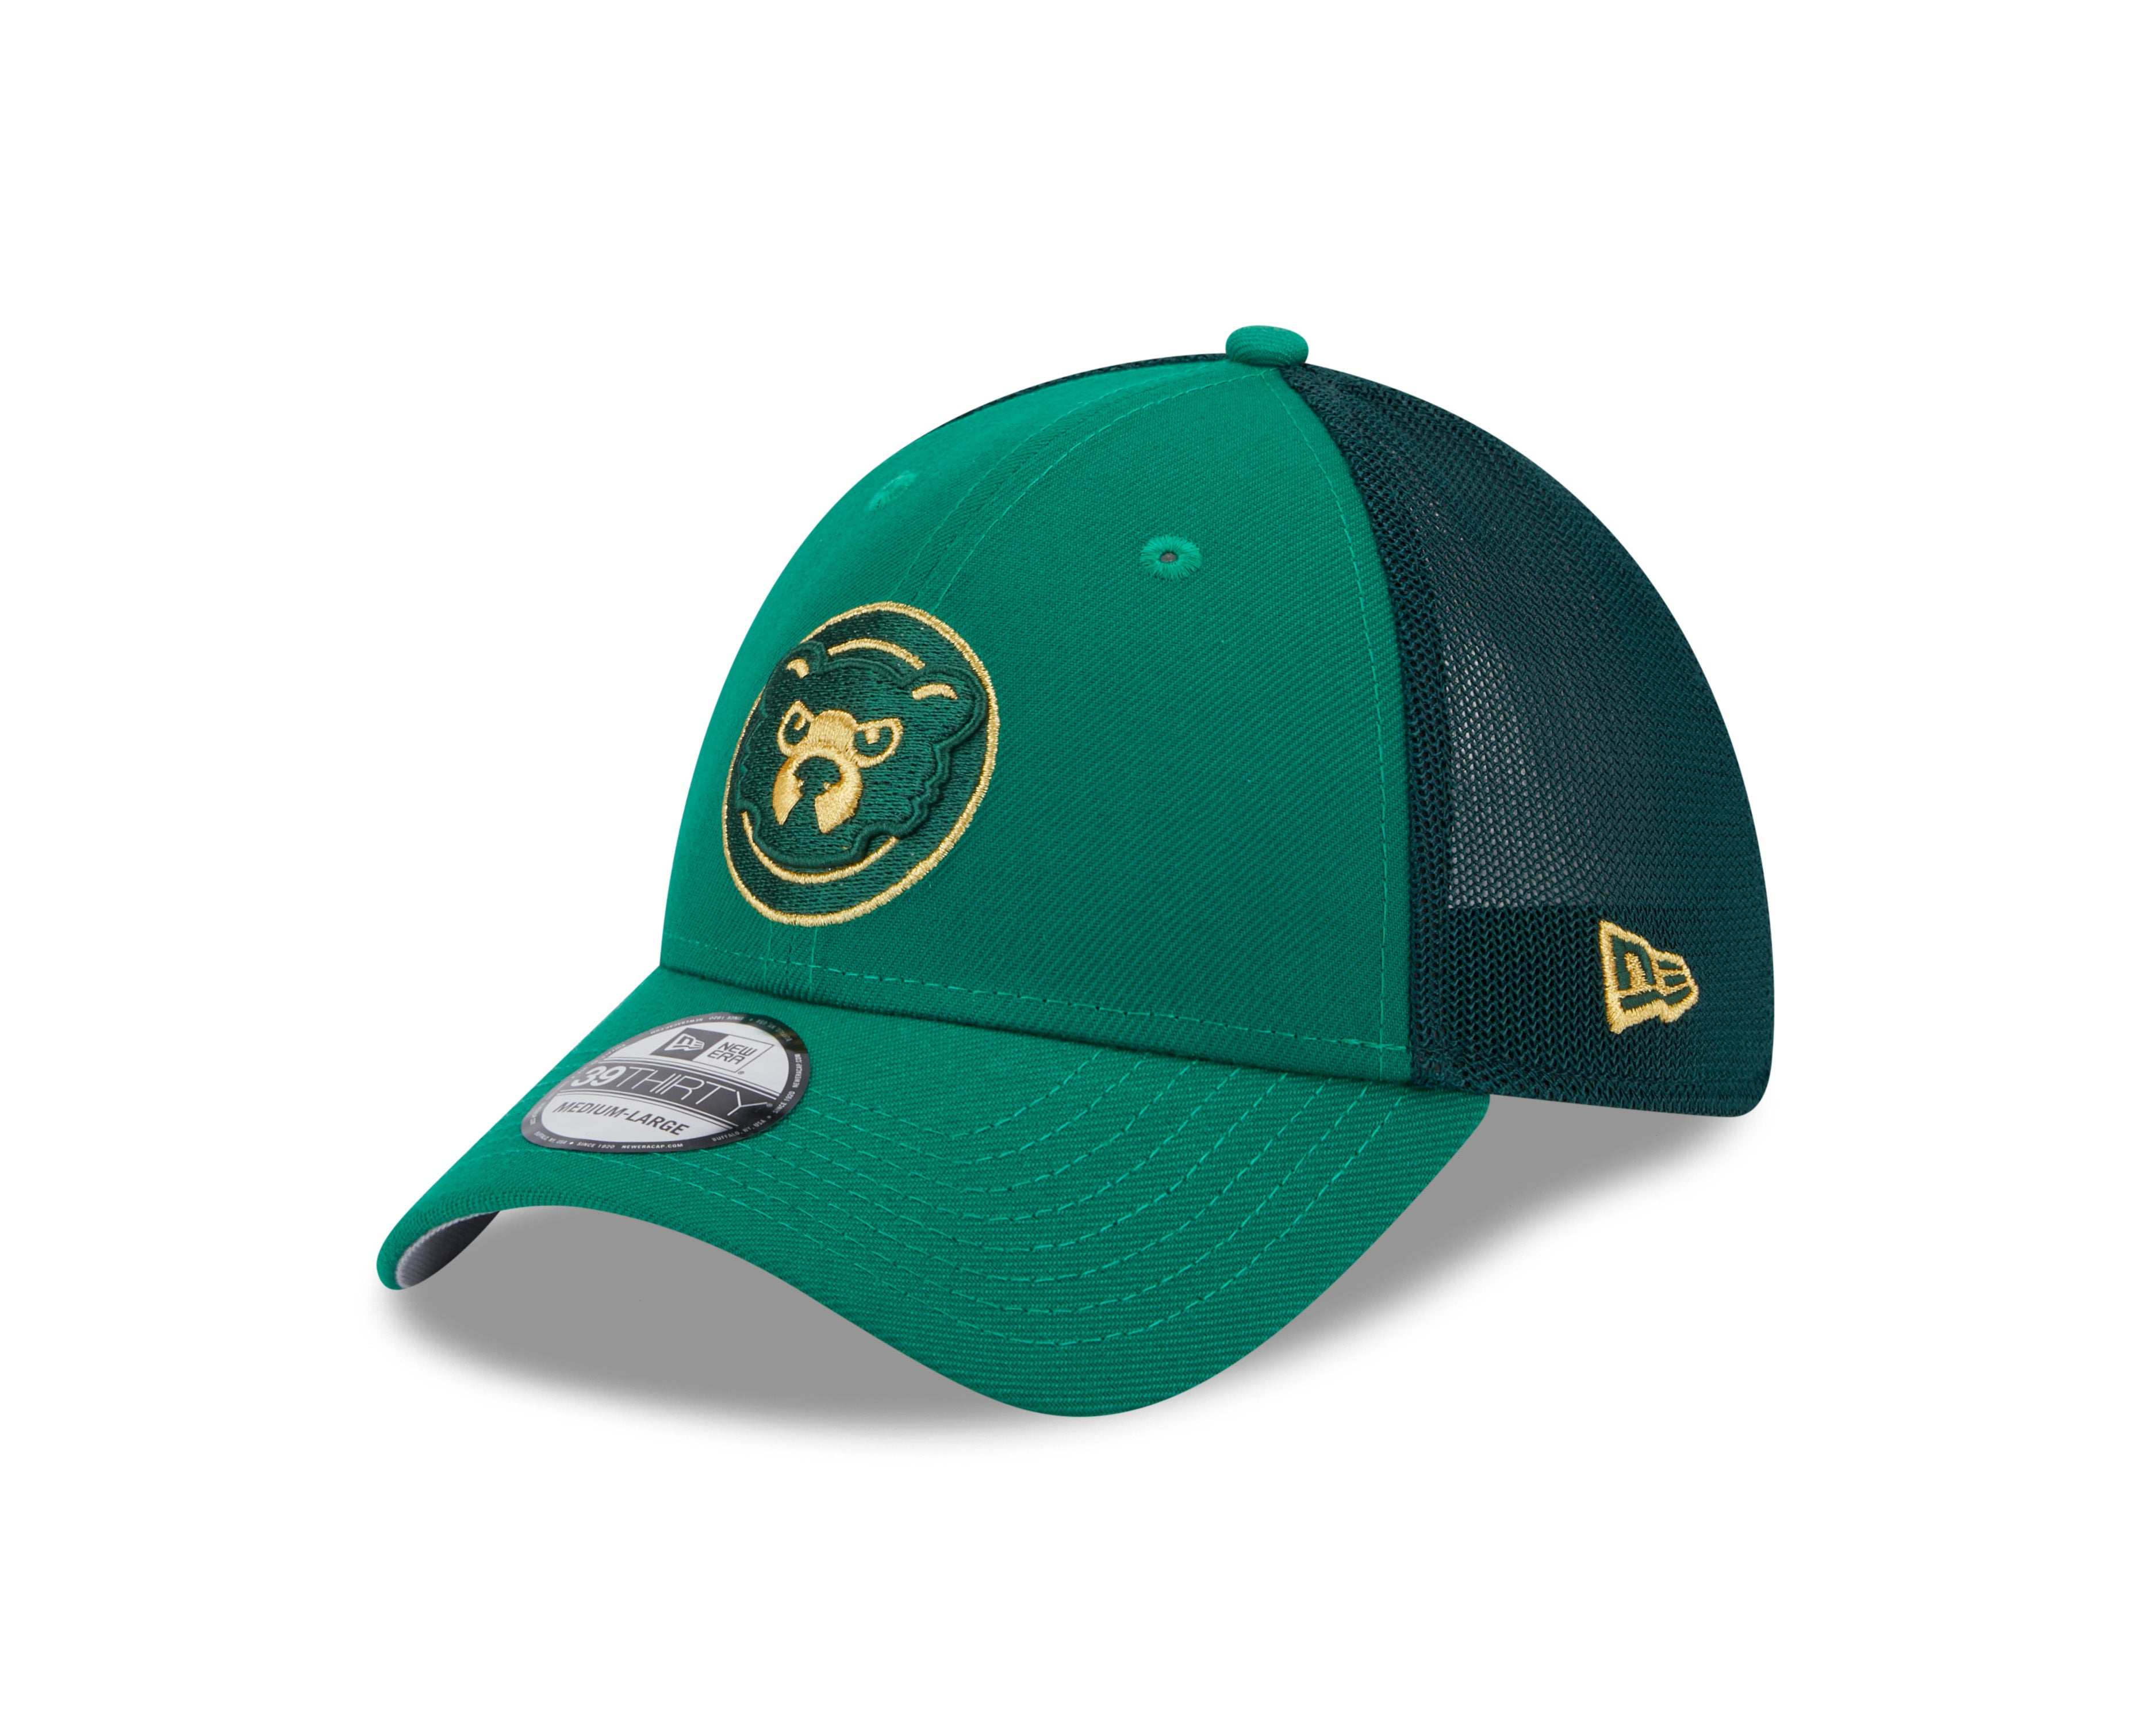 NEW ERA 59FIFTY LOW PROFILE MLB SAINT LOUIS BROWNS COOPERSTOWN TWO TONE /  KELLY GREEN UV FITTED CAP